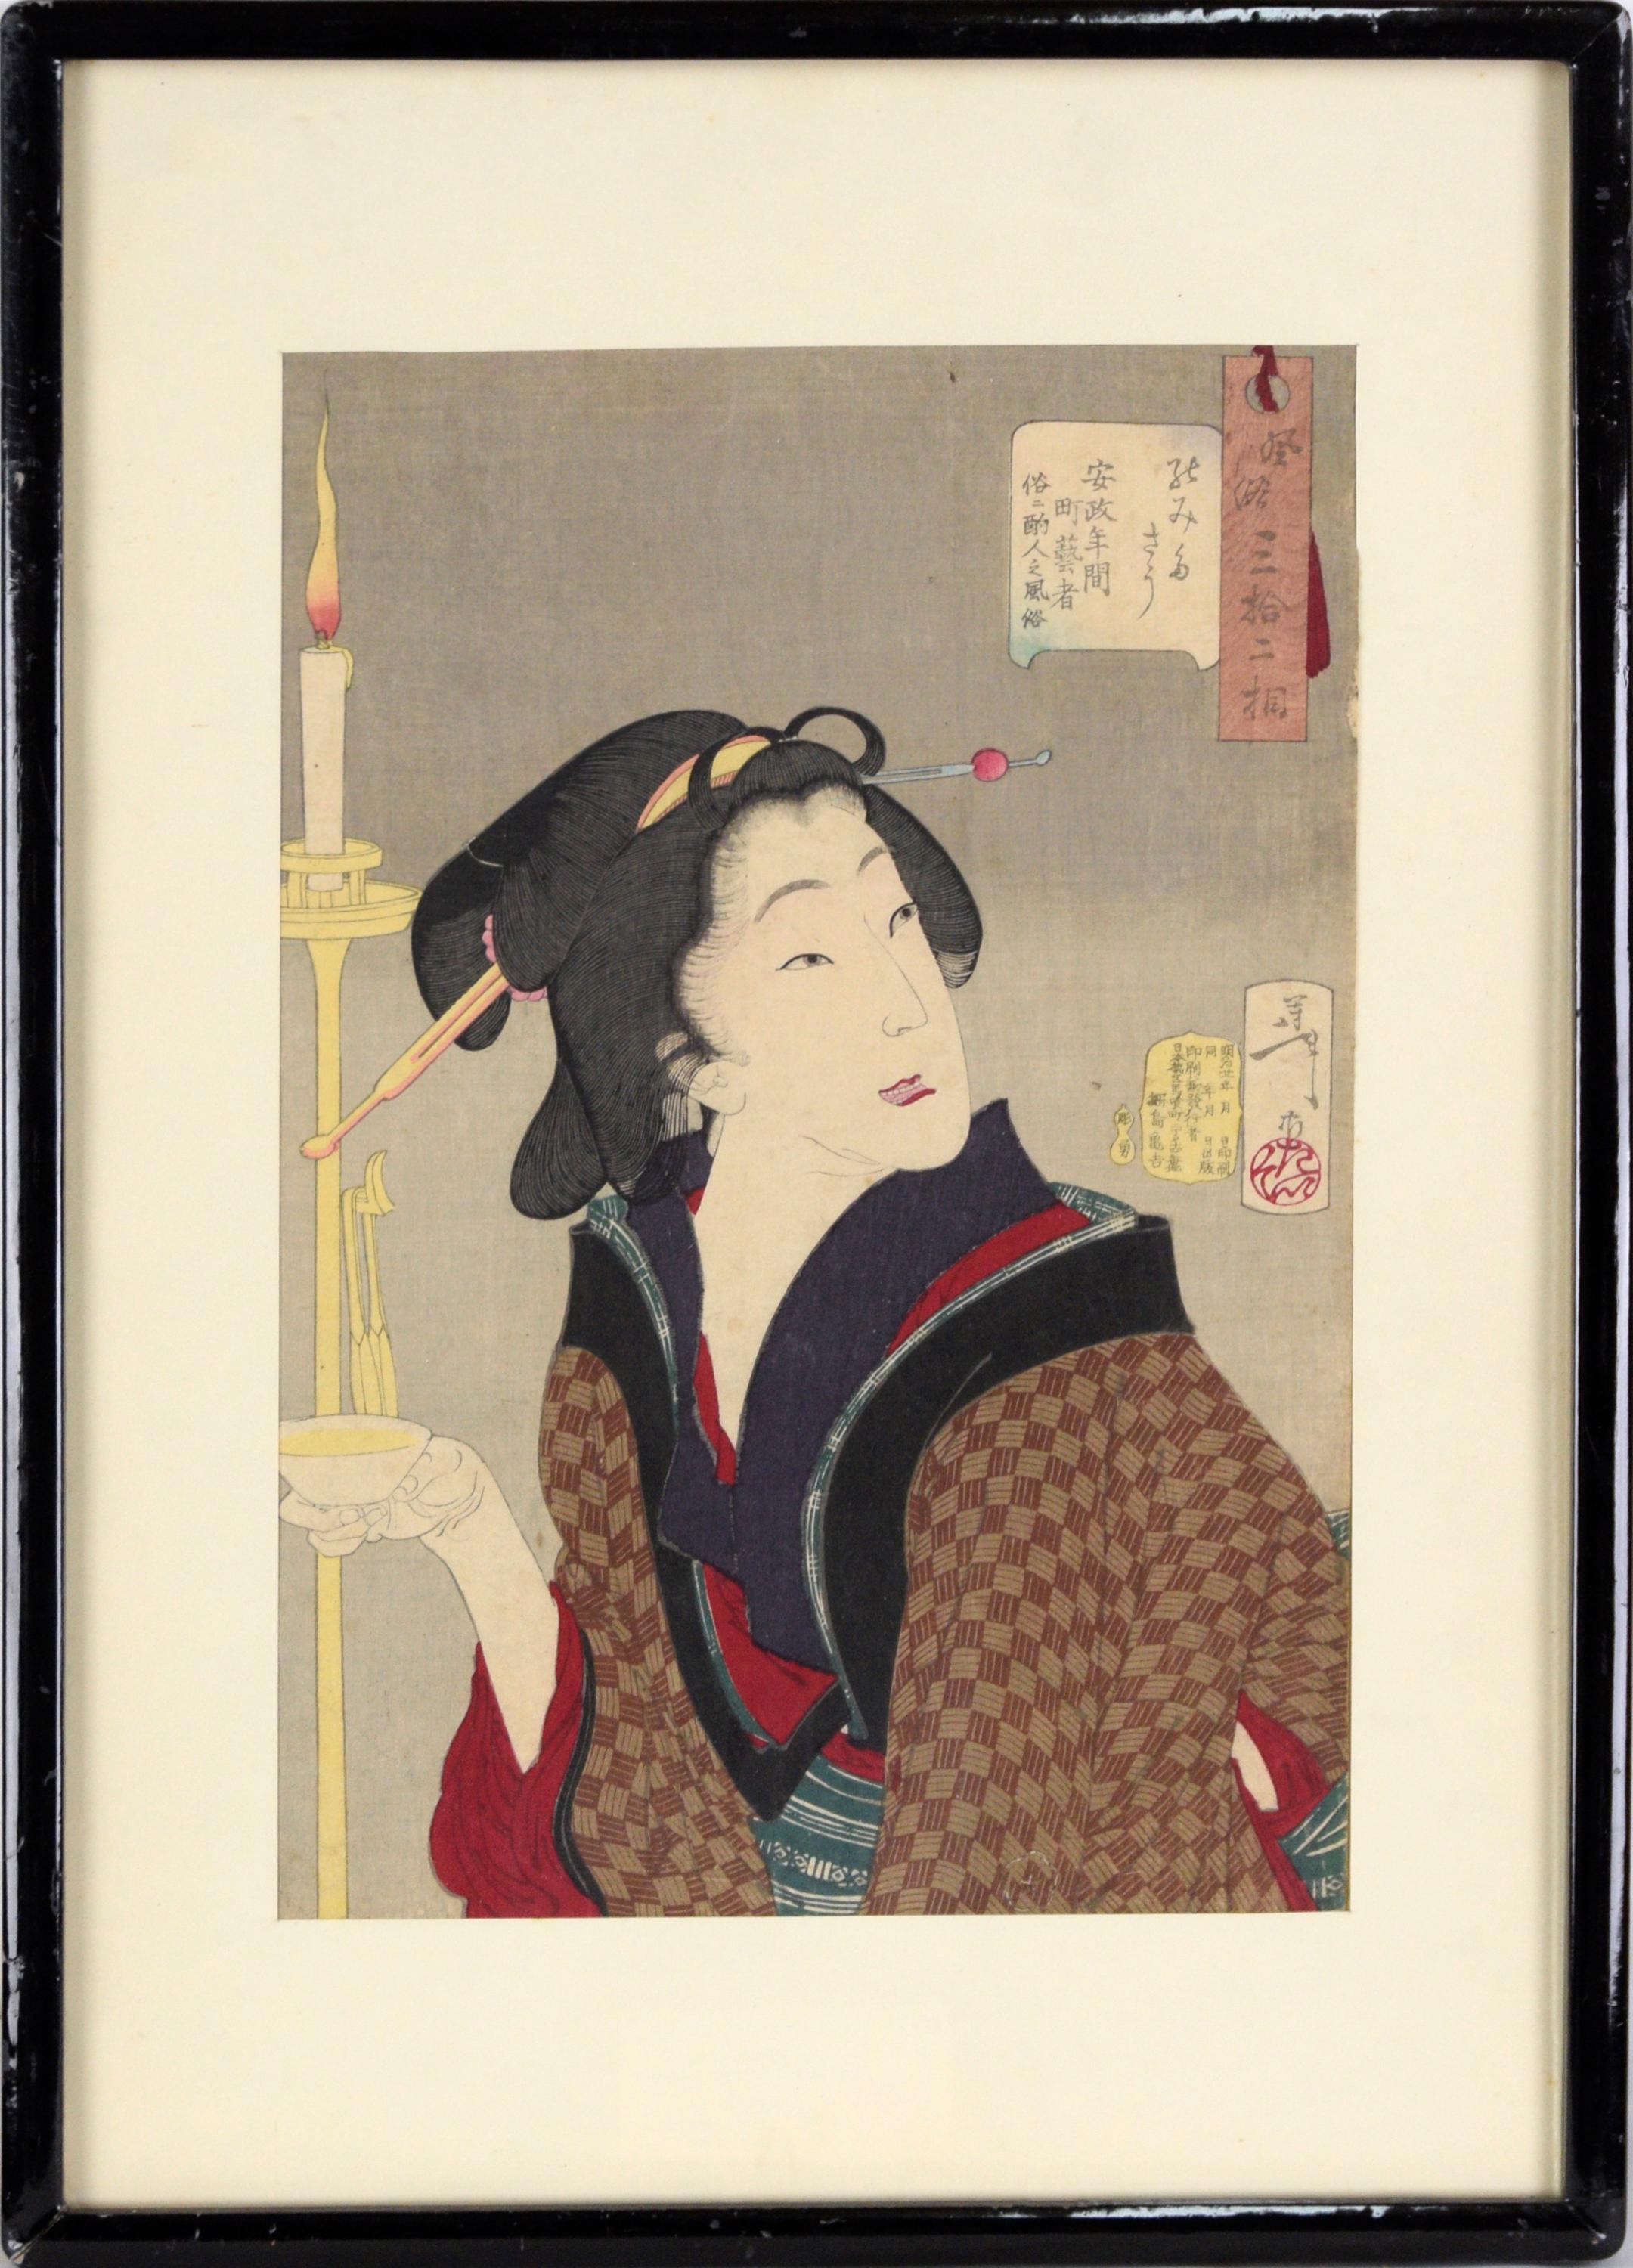 "Thirsty: the appearance of a town geisha in the Ansei era" - Woodblock on Paper